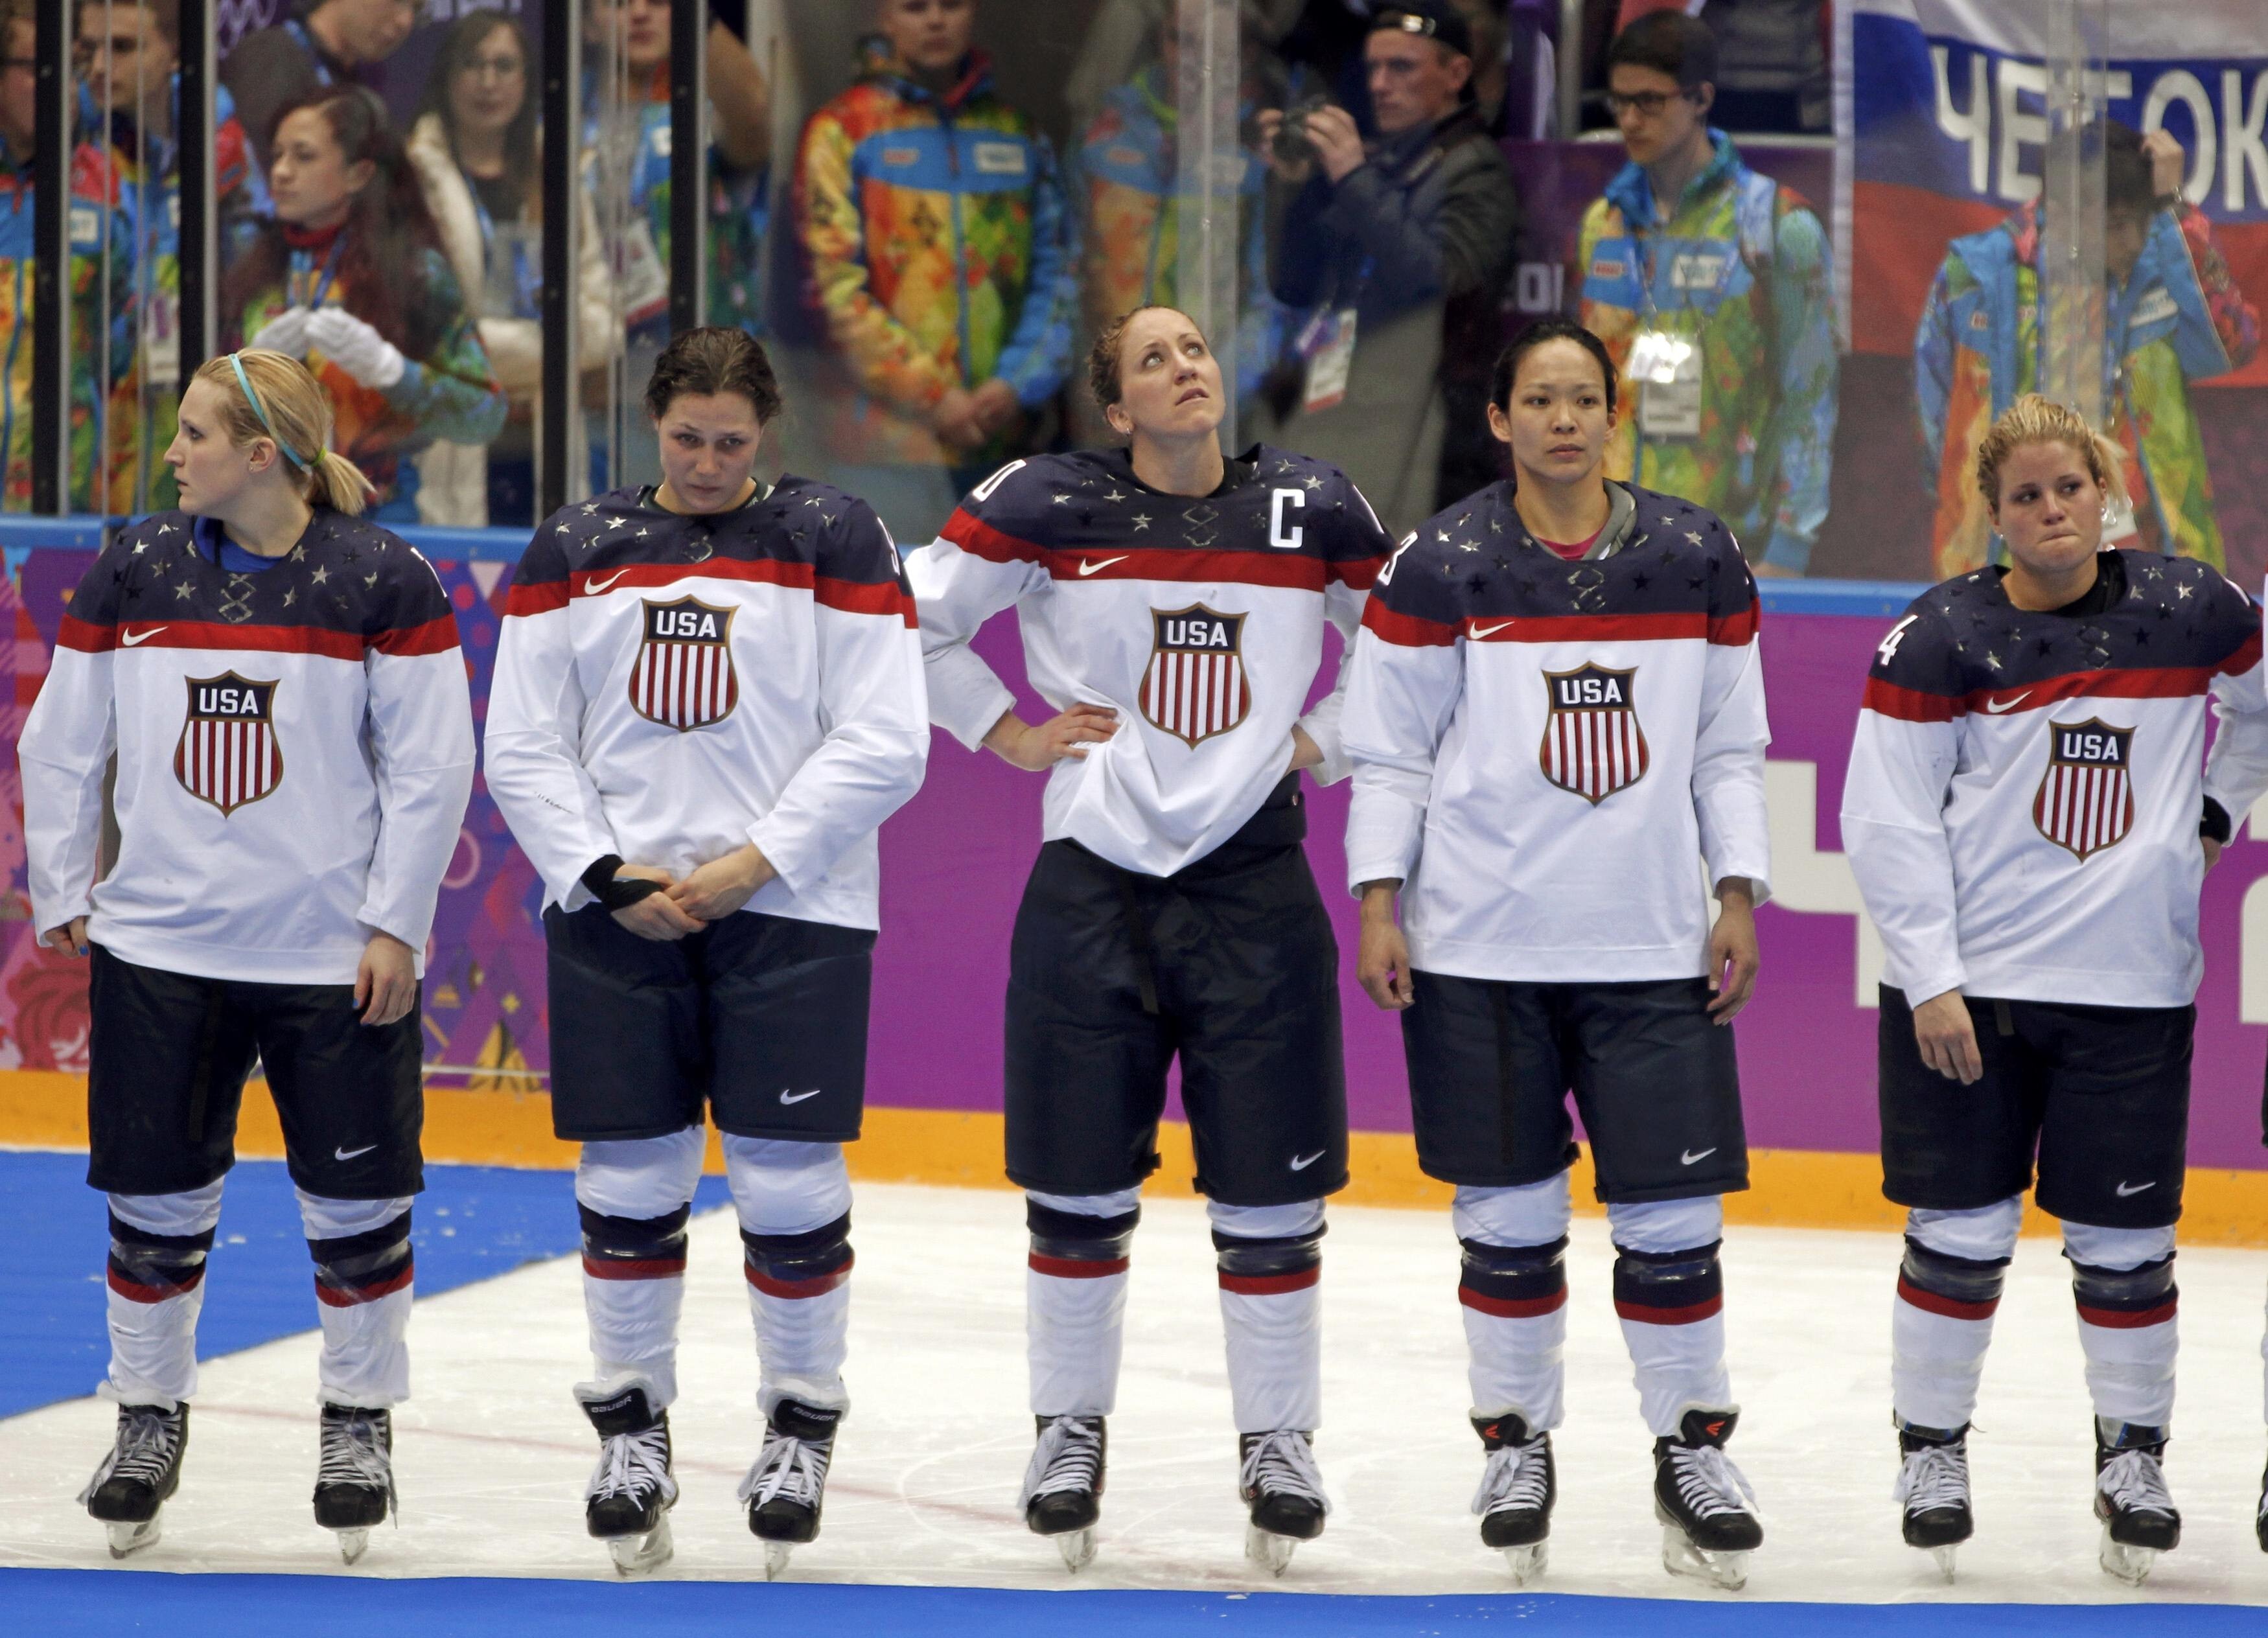 Ice hockey player Julie Chu (second right) with United States team members after missing out on a gold medal against Canada at the Sochi Games in 2014. Photo: Reuters